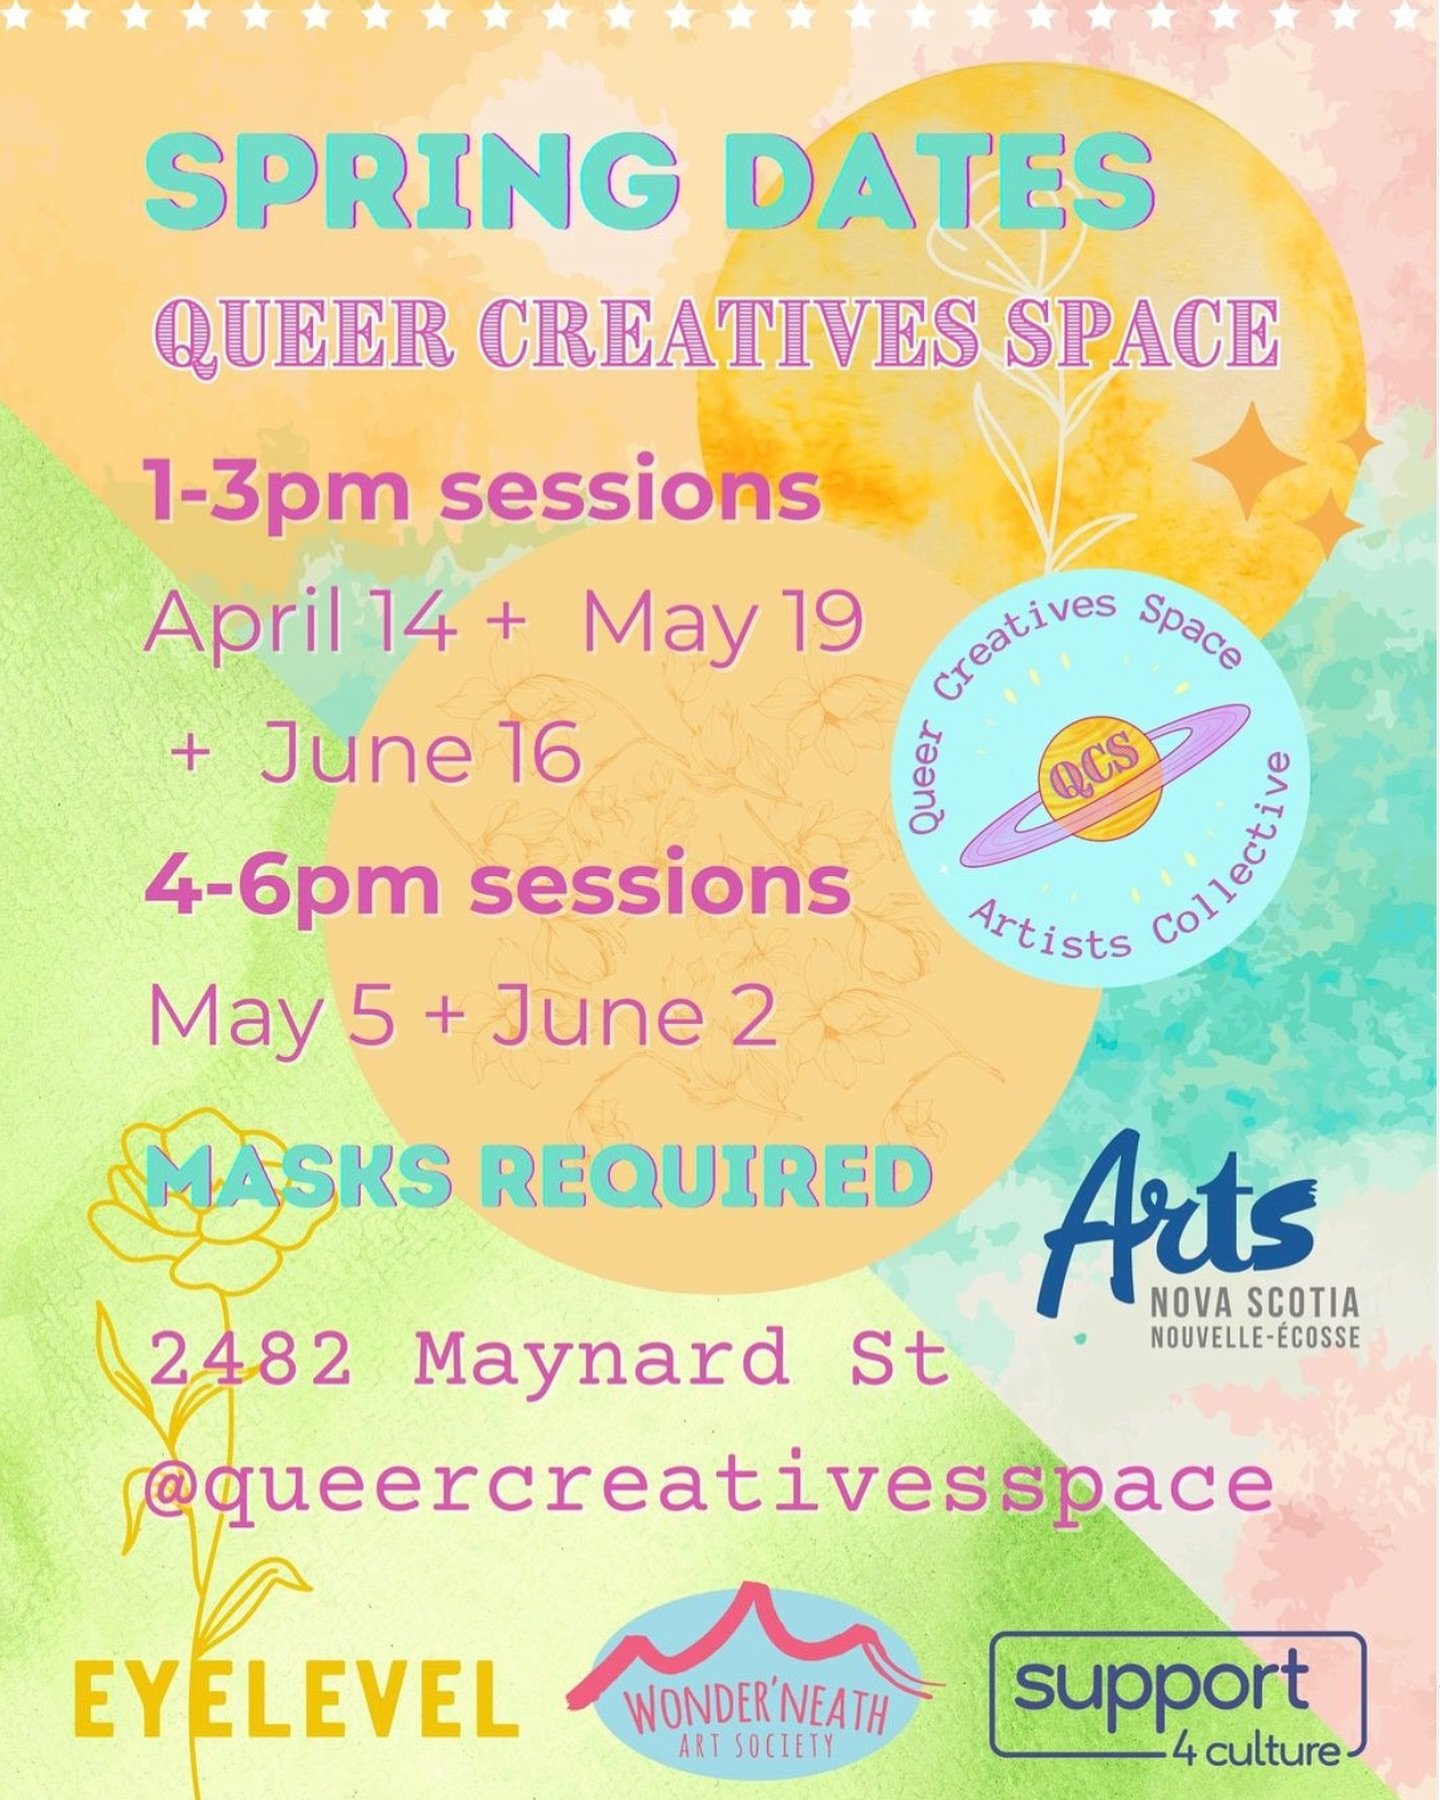 Reposted from @queercreativesspace 

After a busy grant writing season, we&rsquo;re back with our spring dates for Queer Creatives Space&rsquo;s in person programming. This free arts programming is intended for queer, trans, and questioning folks. Al